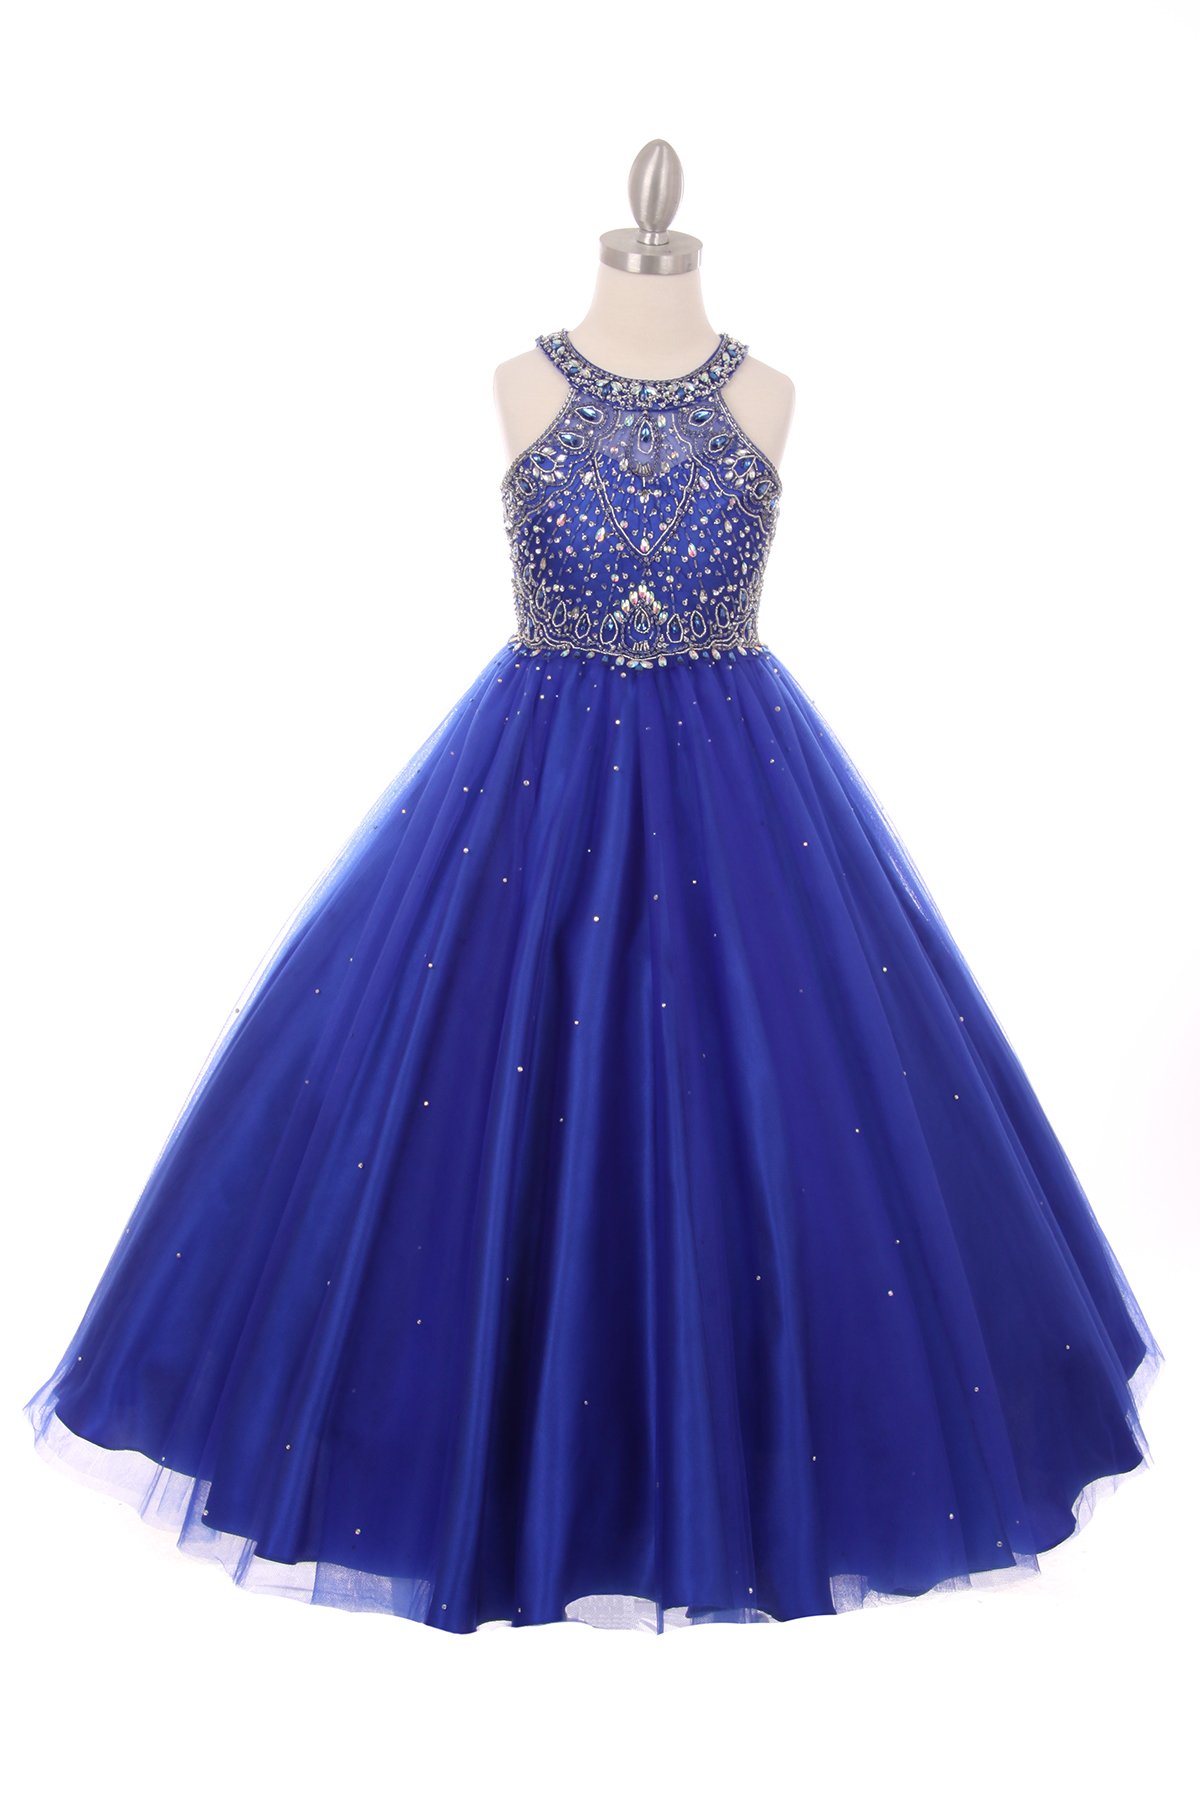 royal blue  rhinestone halter neck party dress. Super soft tulle skirt with wire netting on the bottom.  